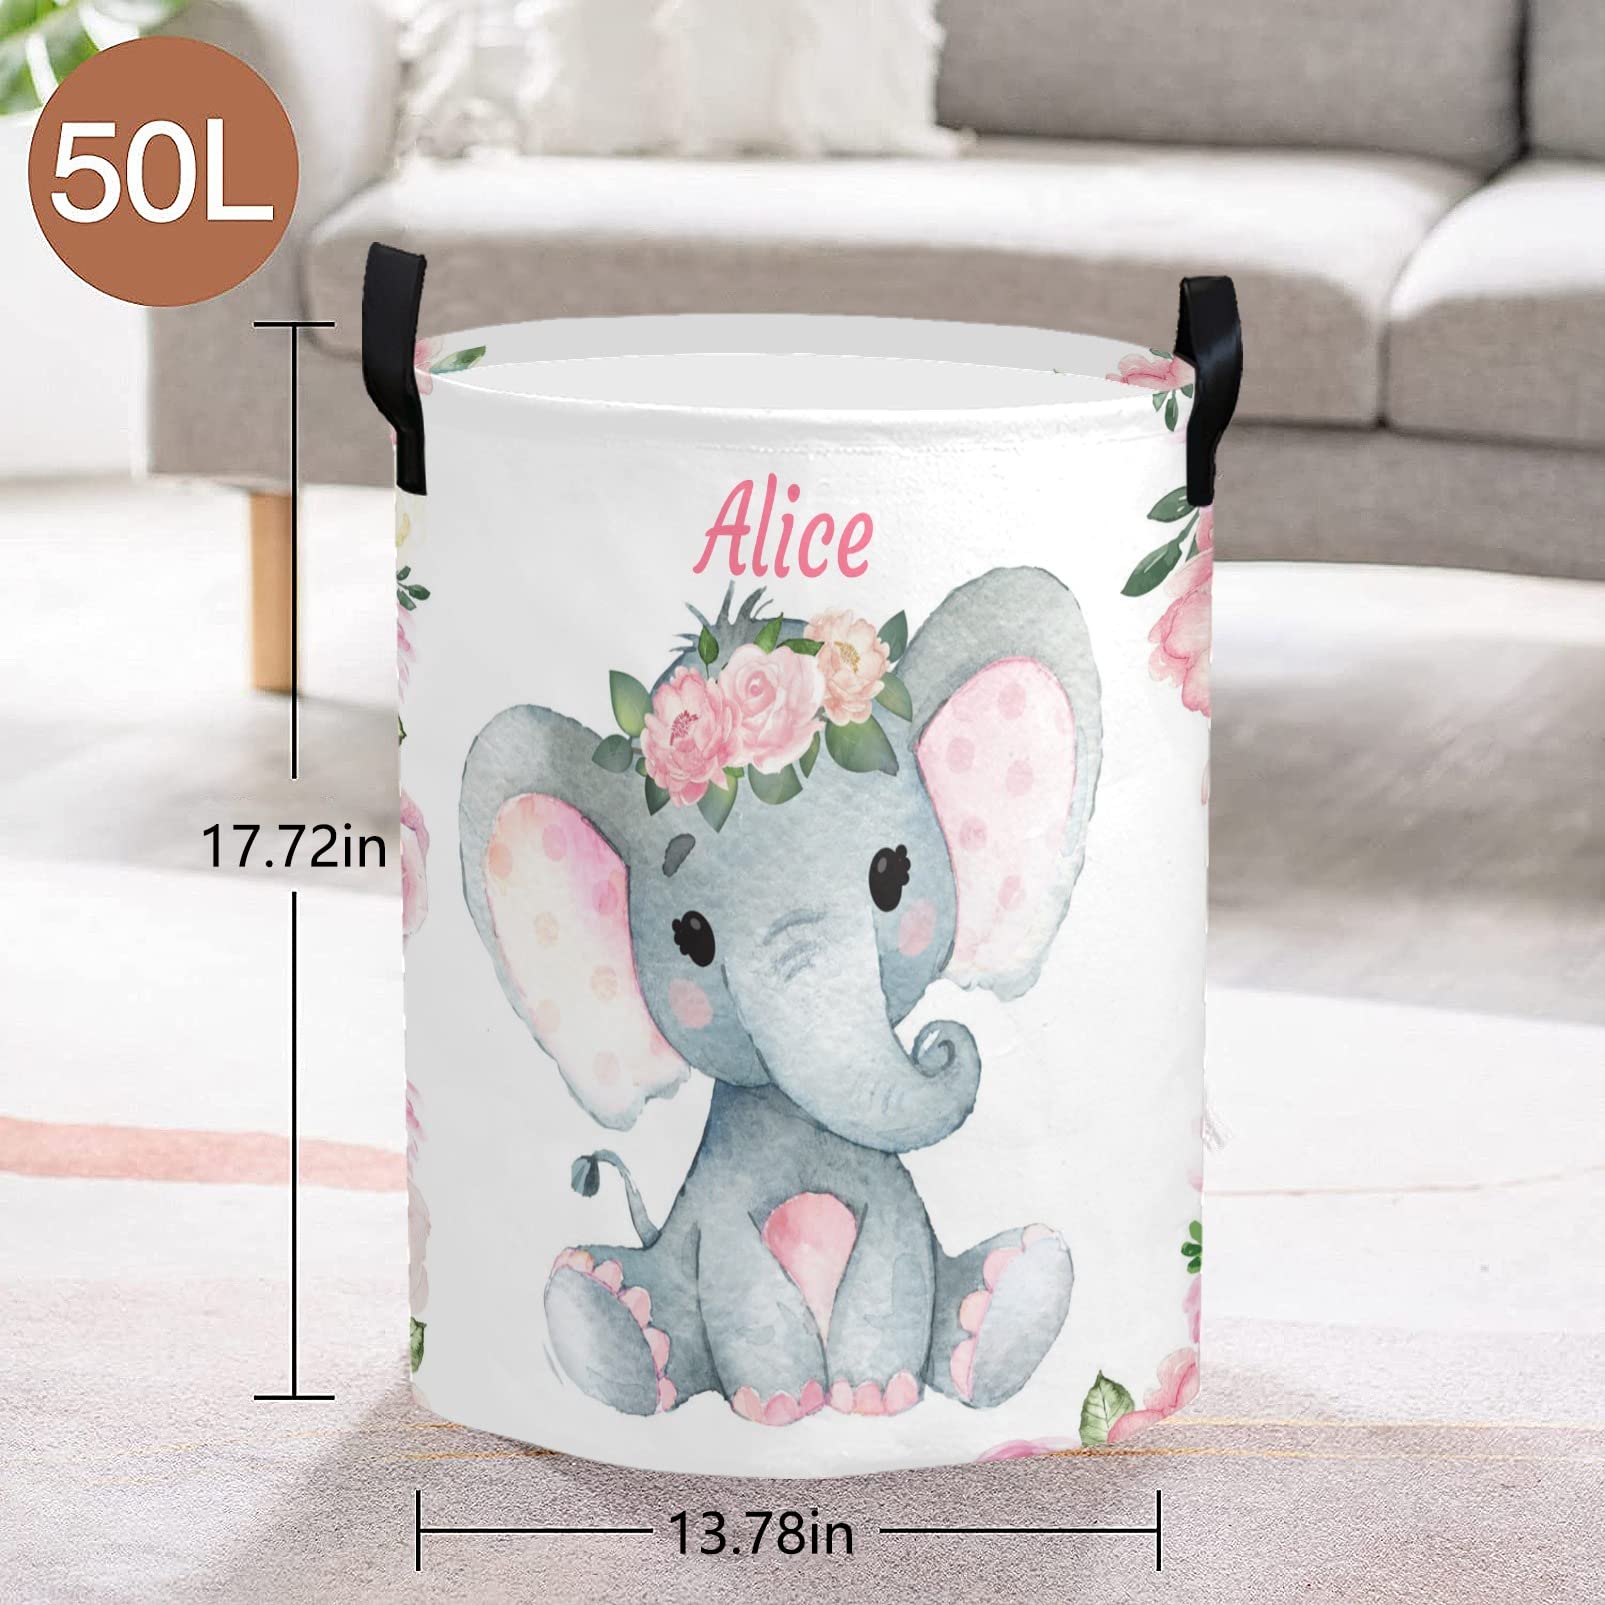 zaaprintblanket Customized Laundry Basket Name Organizer Bin Laundry Hamper with Handle Clothes Hamper for Nursery Clothes Toys Decor(Pink Florals Baby Elephant)